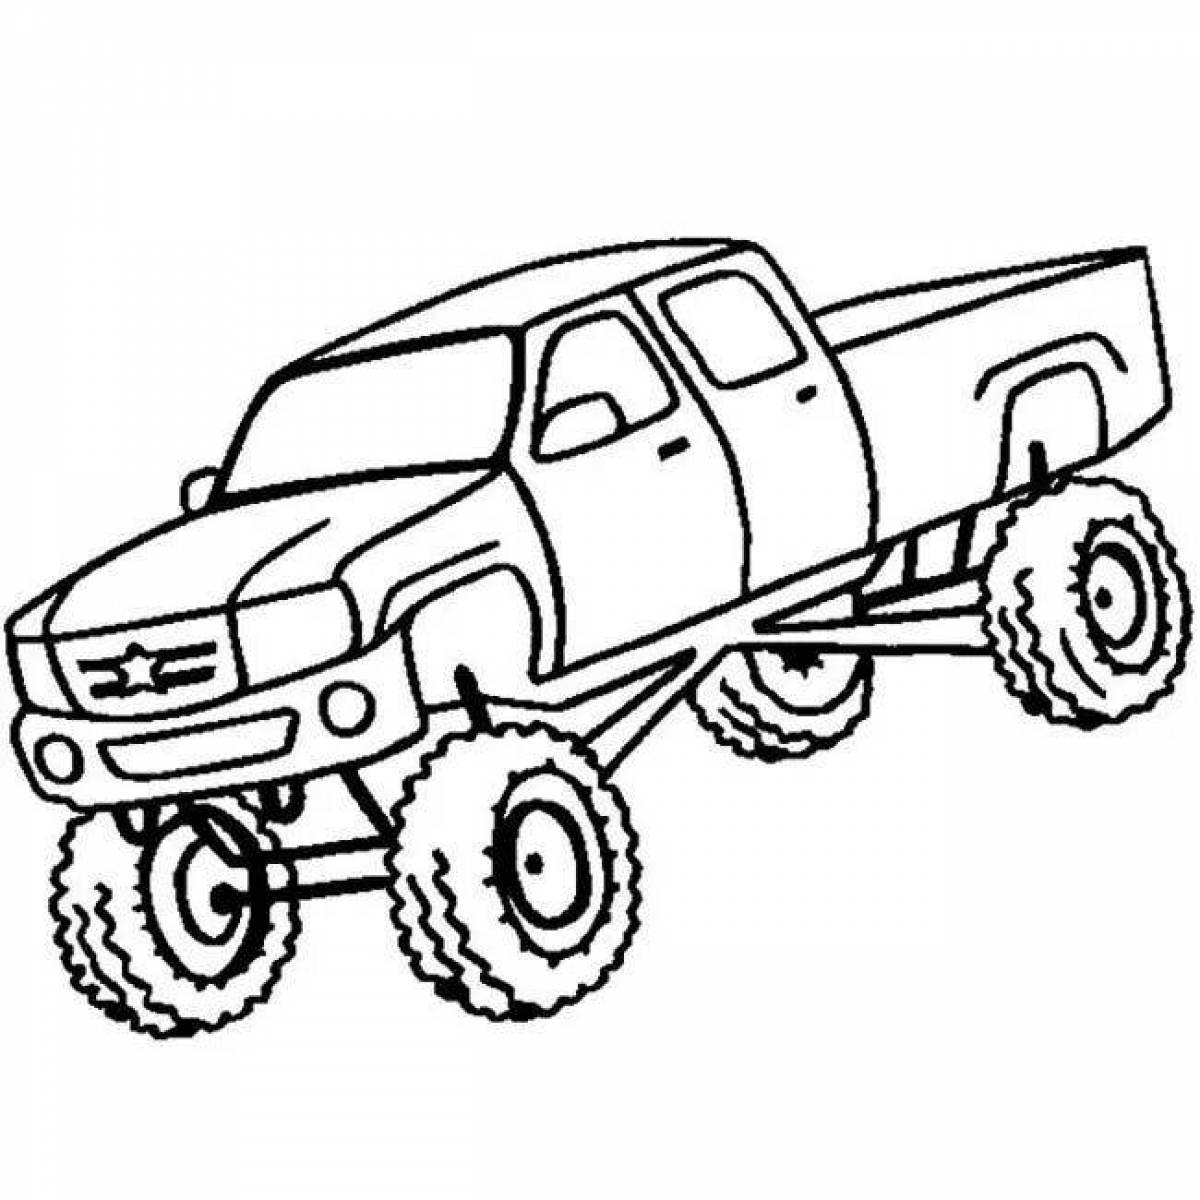 Coloring book playful pickup truck